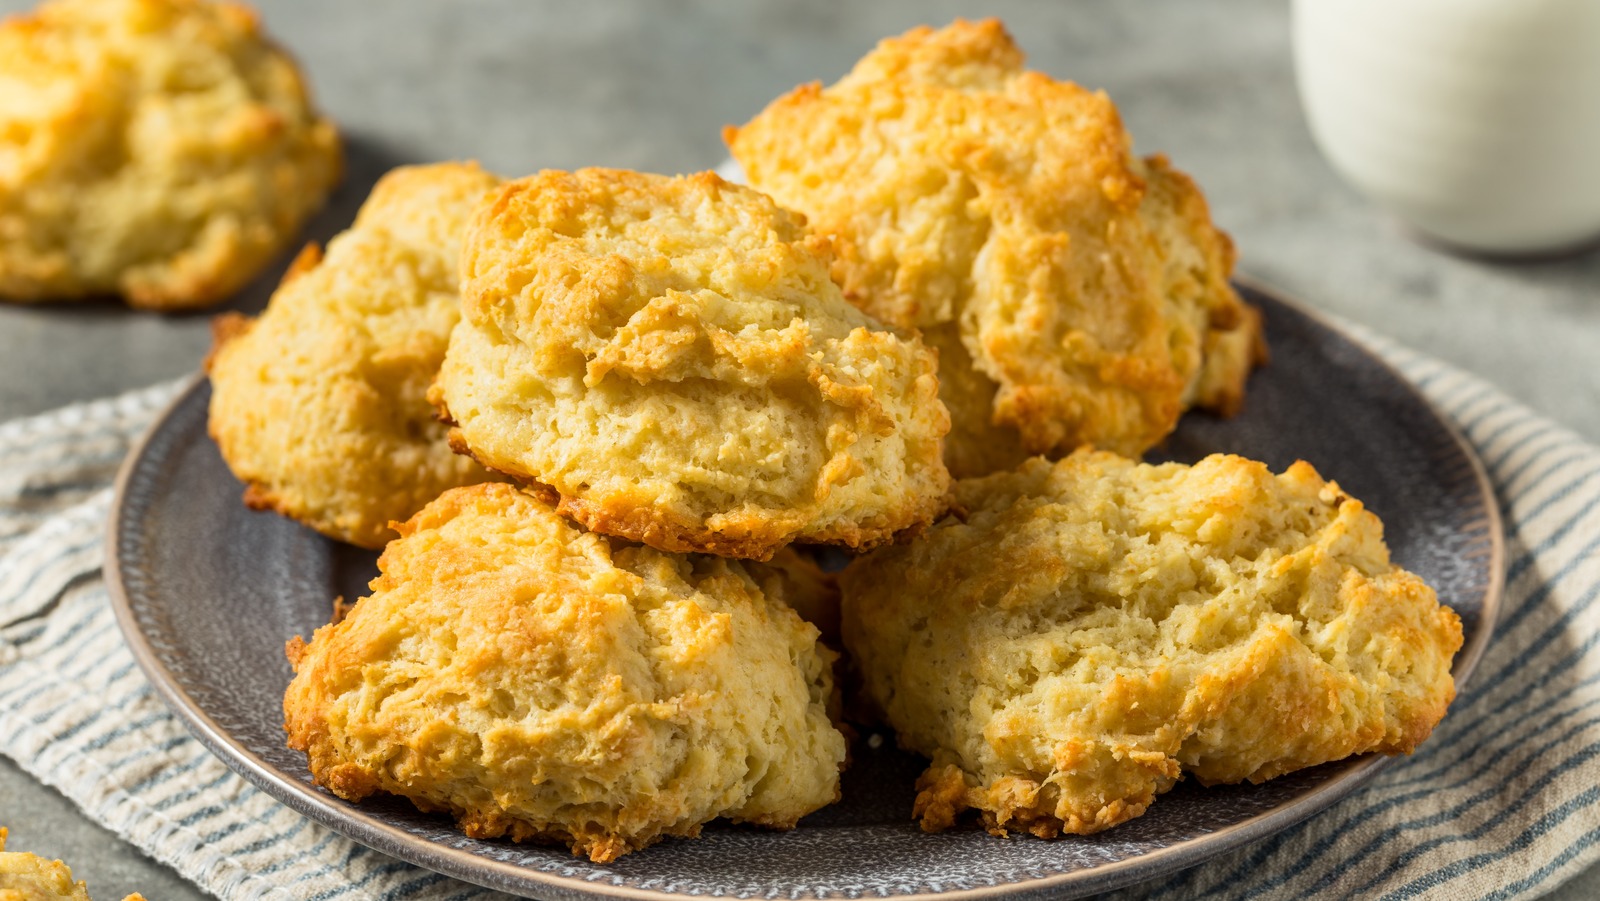 How To Determine When To Make Drop Biscuits Vs Roll-And-Cut